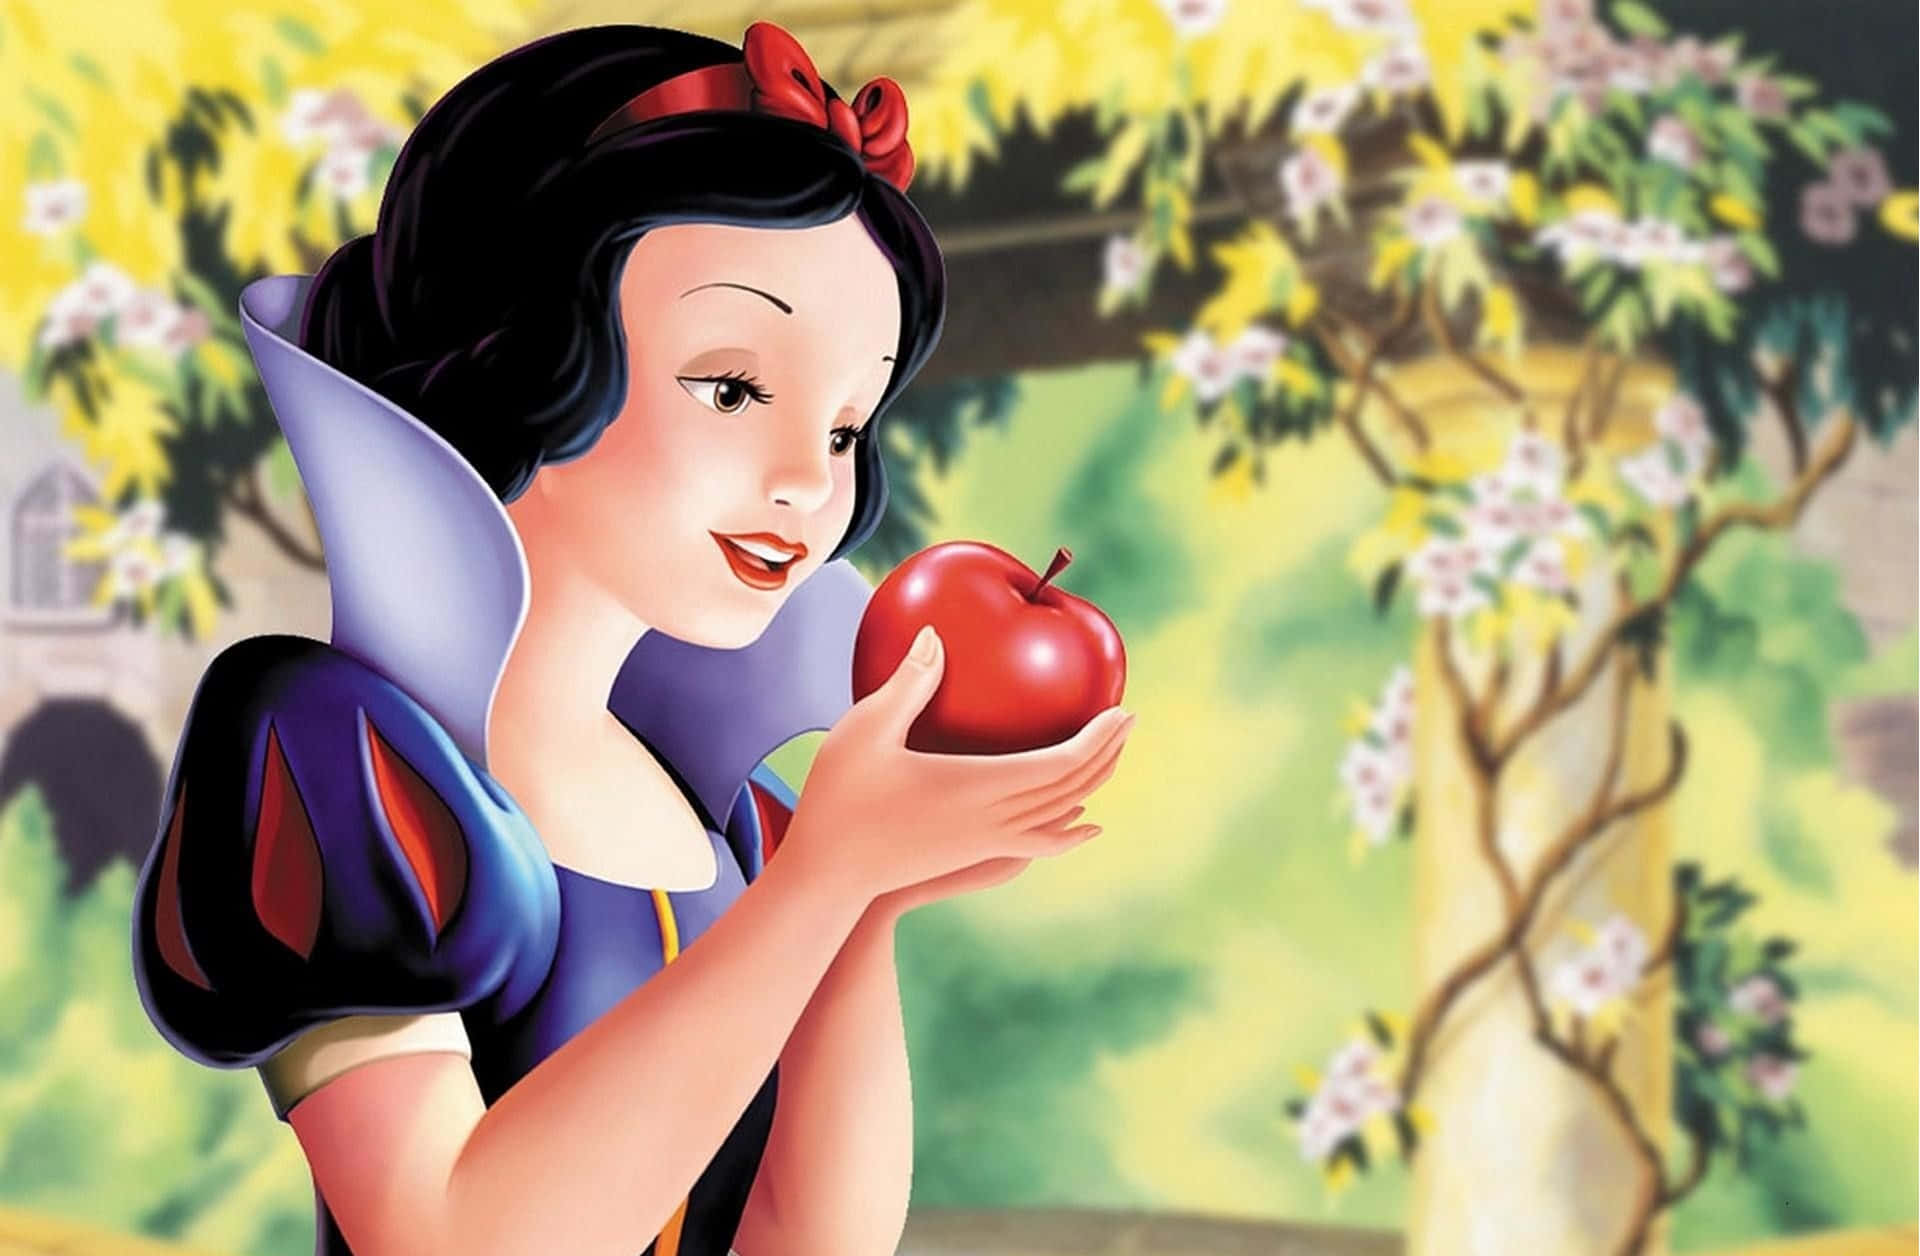 Snow White looking through the forest